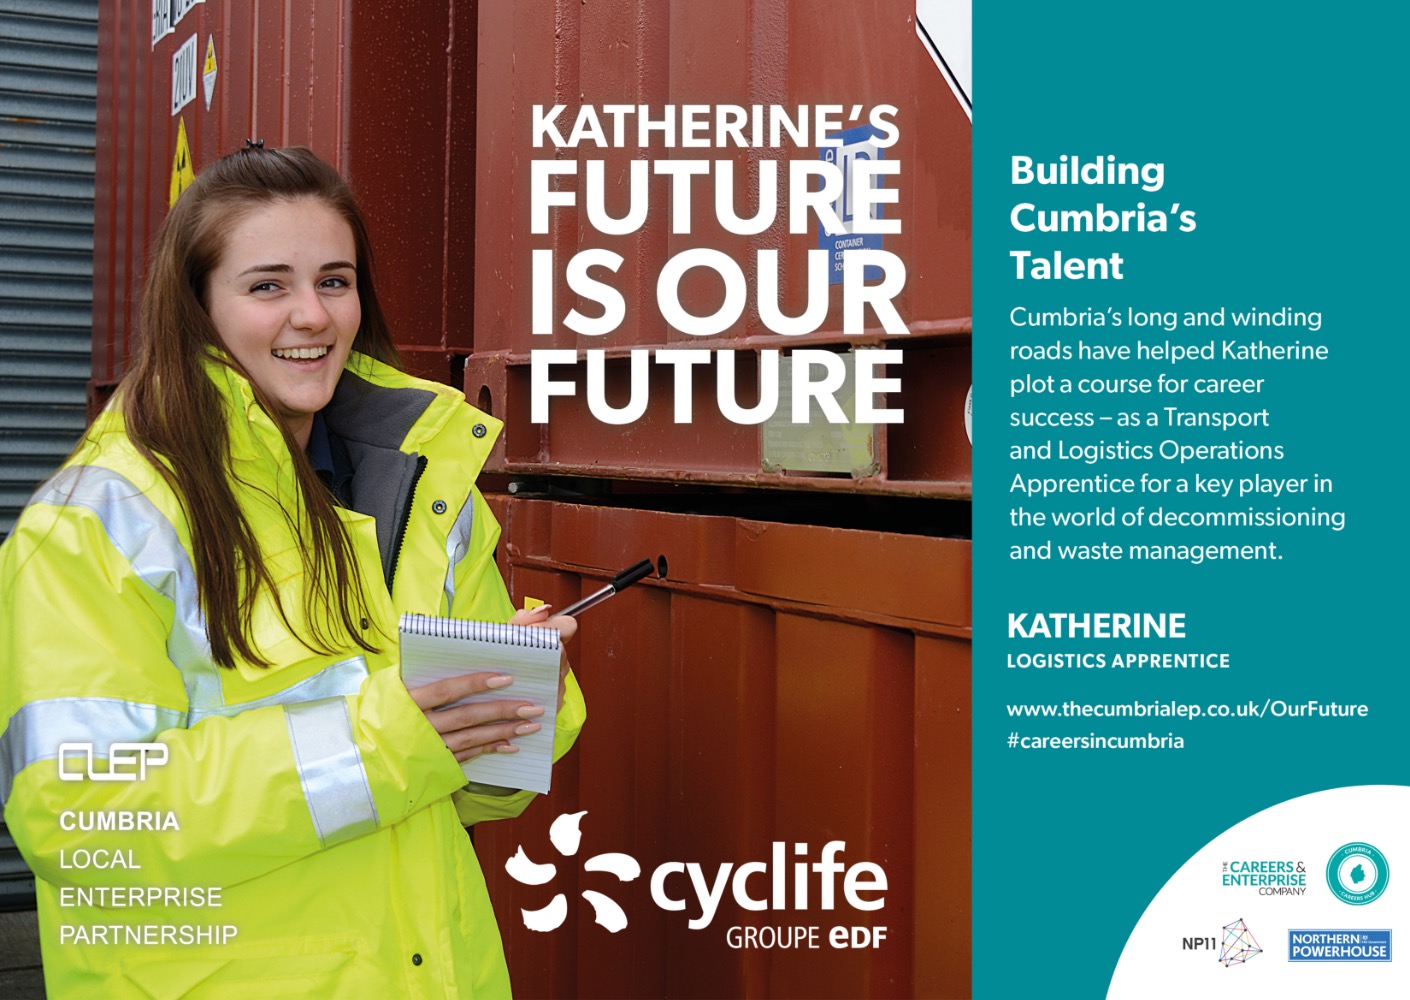 Building Cumbria's Talent - Cumbria's long and winding roads have helped Katherine plot a course for career success - as a Transport and Logistics Operations Apprentice for a key player in the world of decommissioning and waste management. (Photo of Katherine, logistics apprentice).